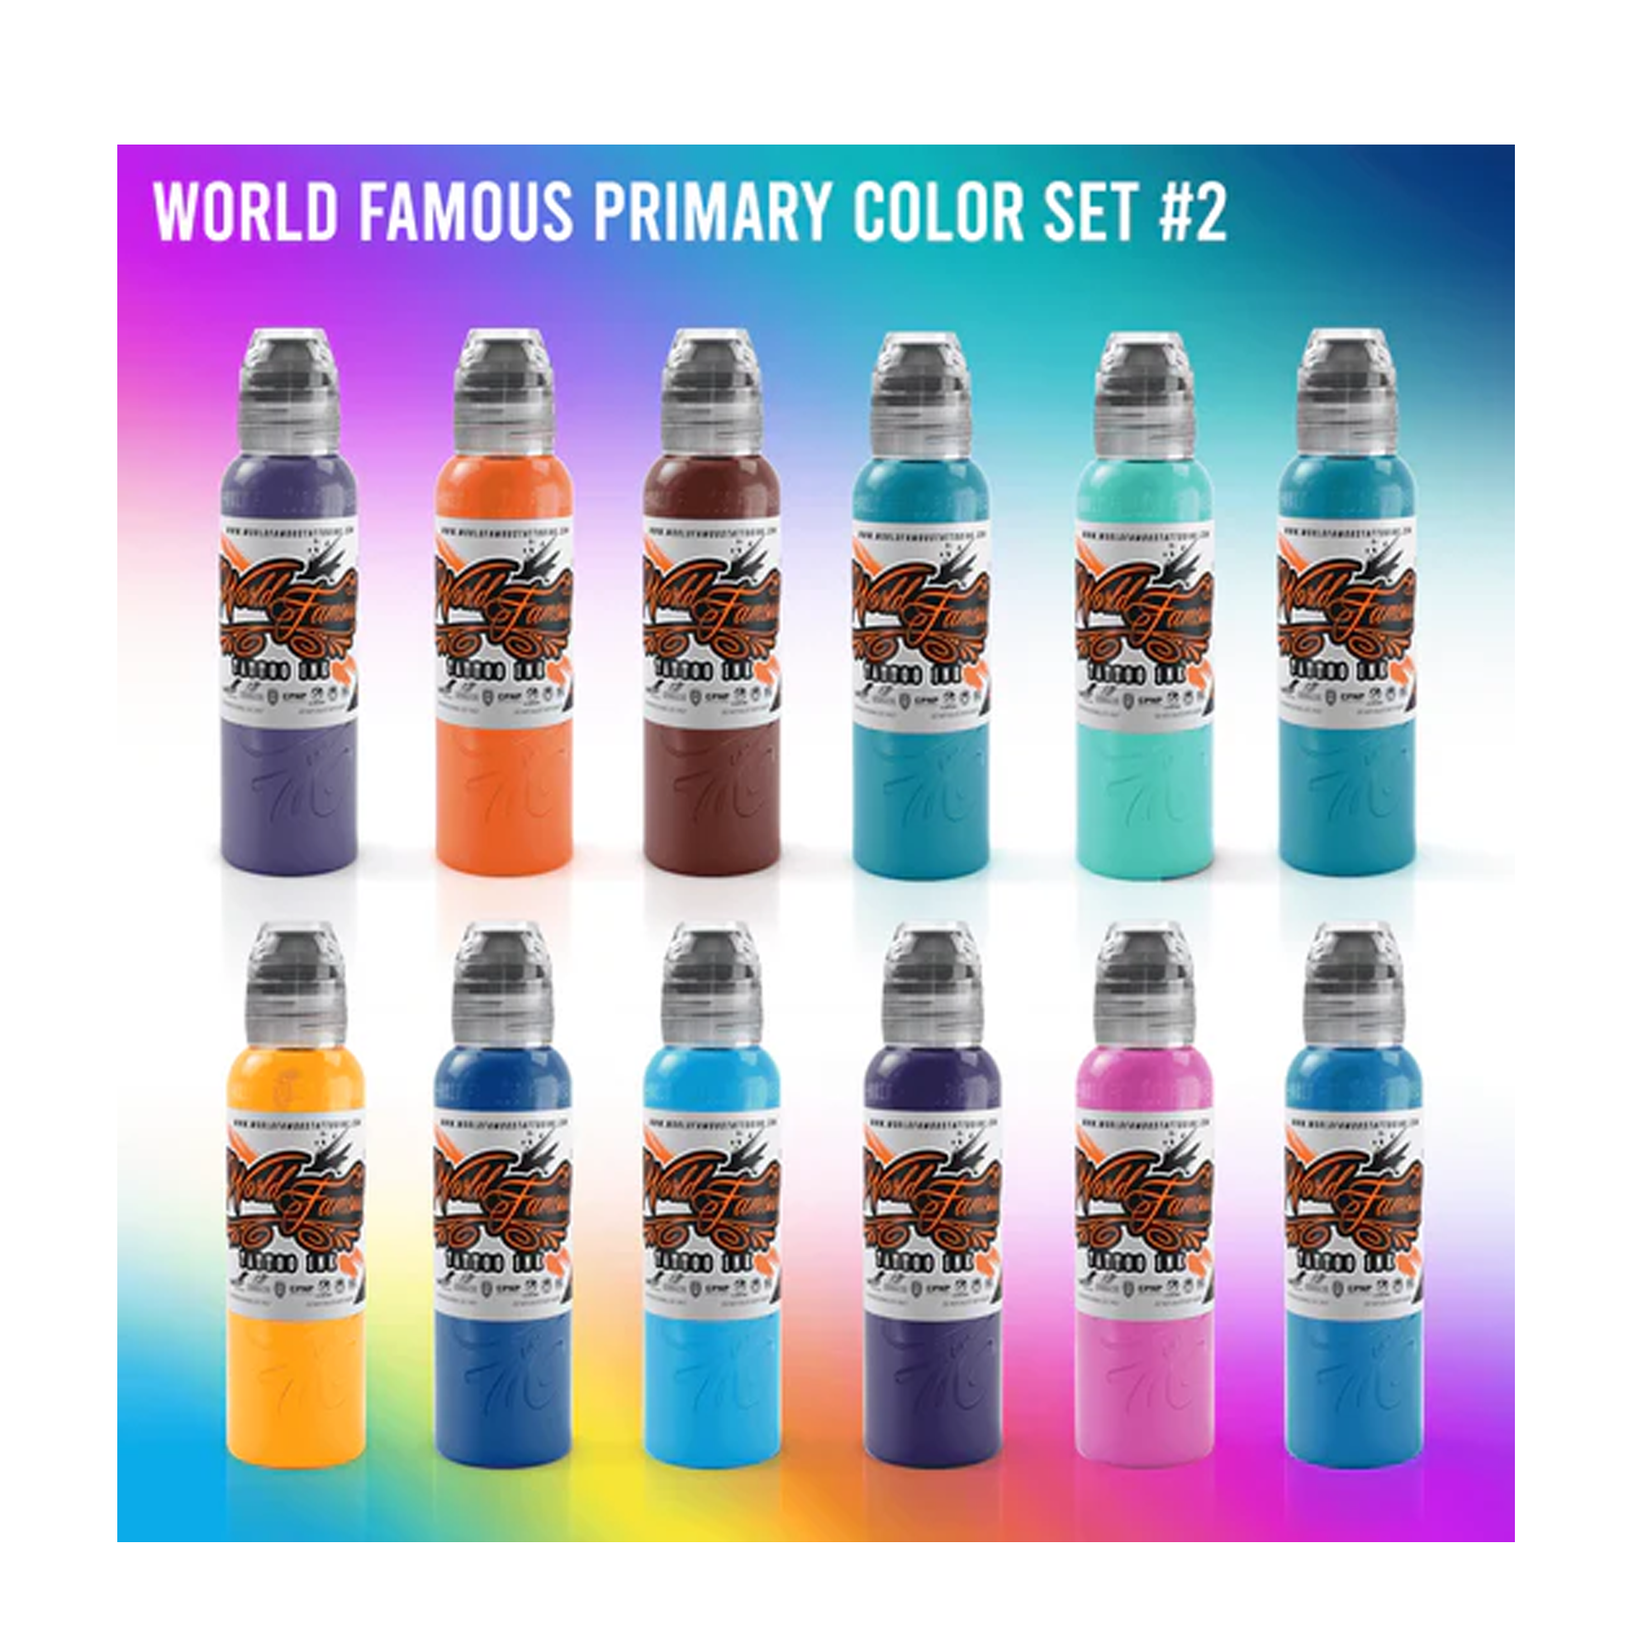 WORLD FAMOUS PRIMARY INK SET #2